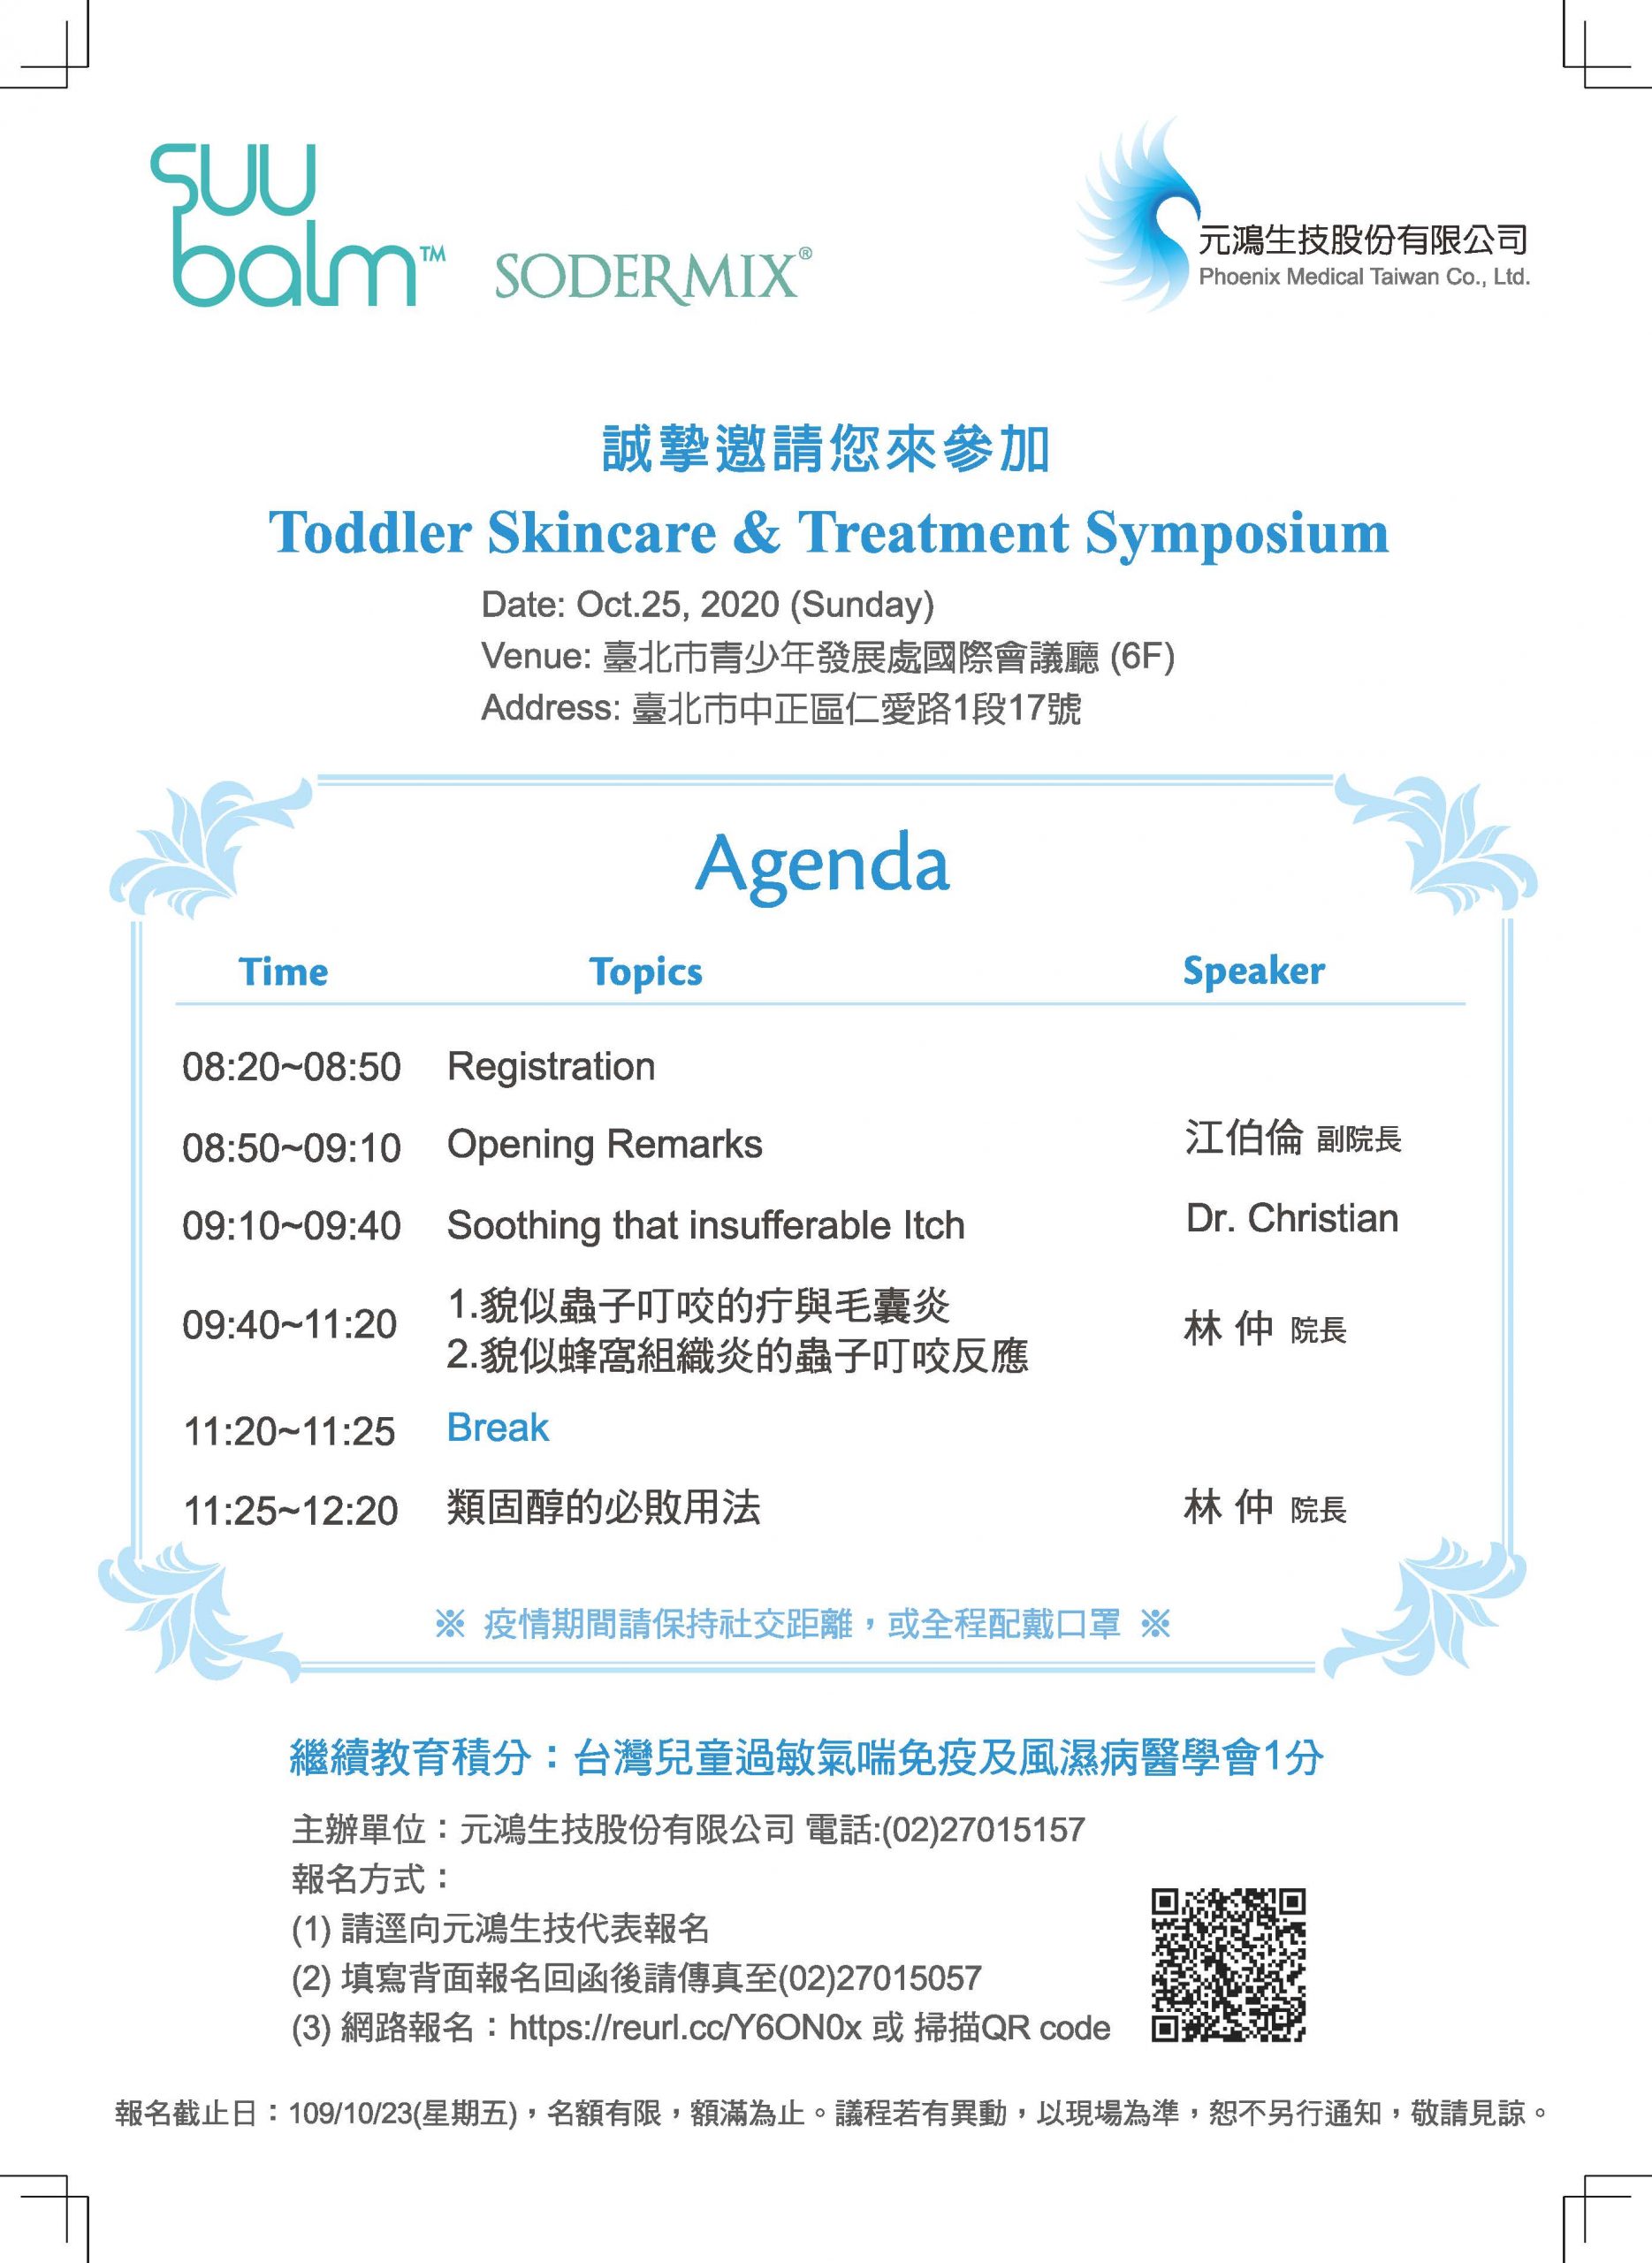 For better management of toddler eczema & skin disorders, we held a special lecture for Dermatologists, Pediatricians & Family doctors in Taipei city on Oct.25th, 2020